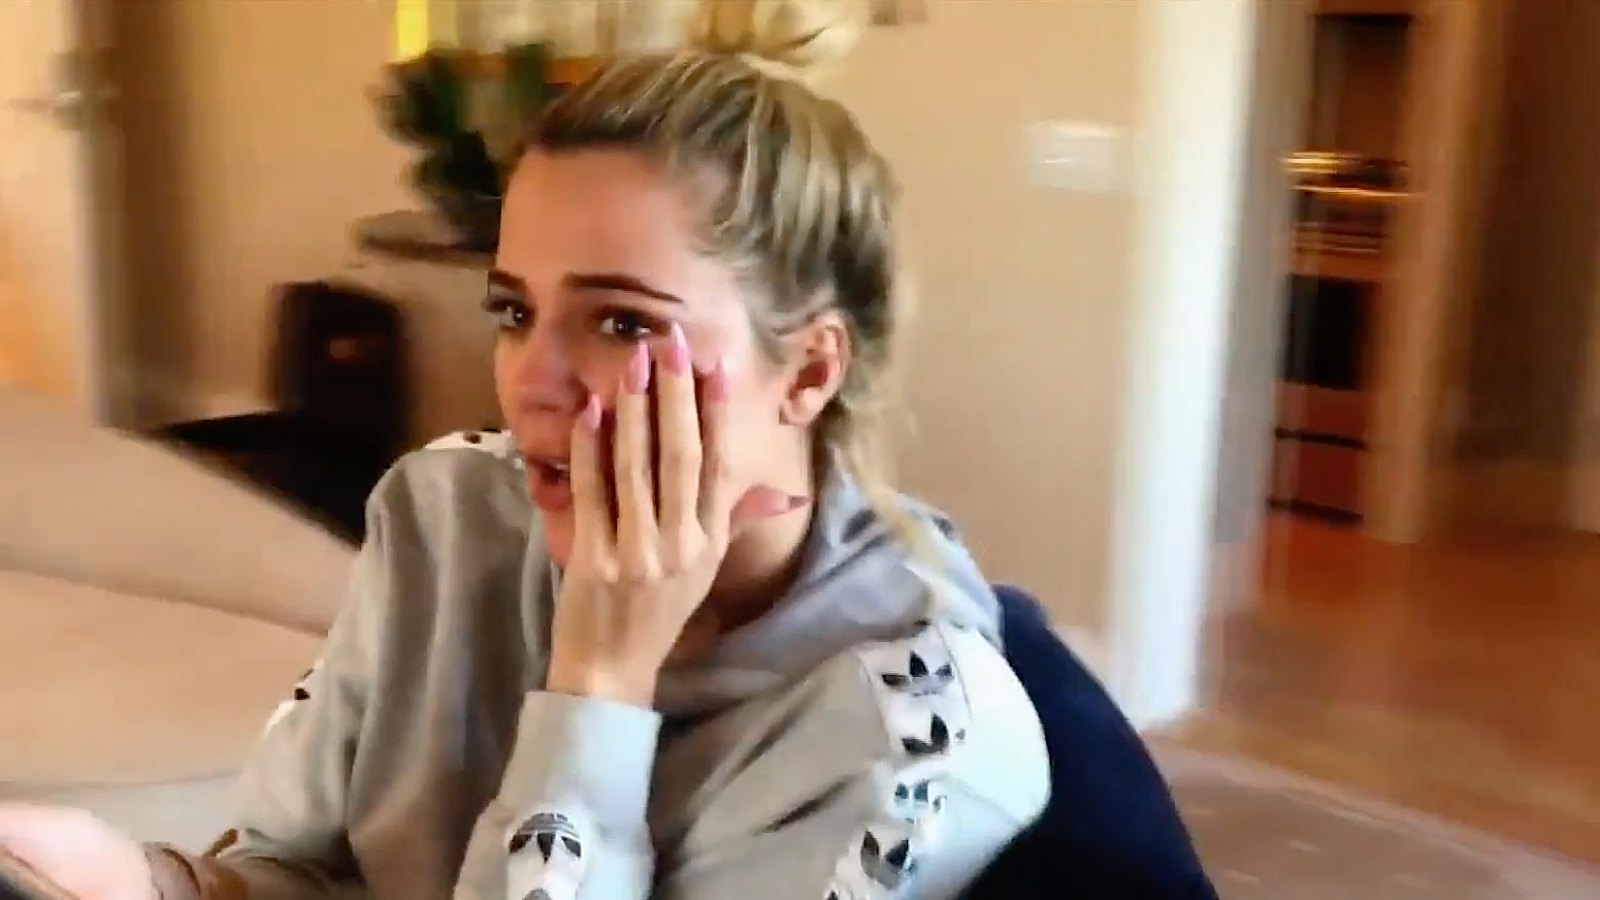 Khloe Kardashian Cries Over Tristan Thompson and Jordyn Woods’ Cheating Scandal in New ‘Keeping Up With the Kardashians’ Trailer